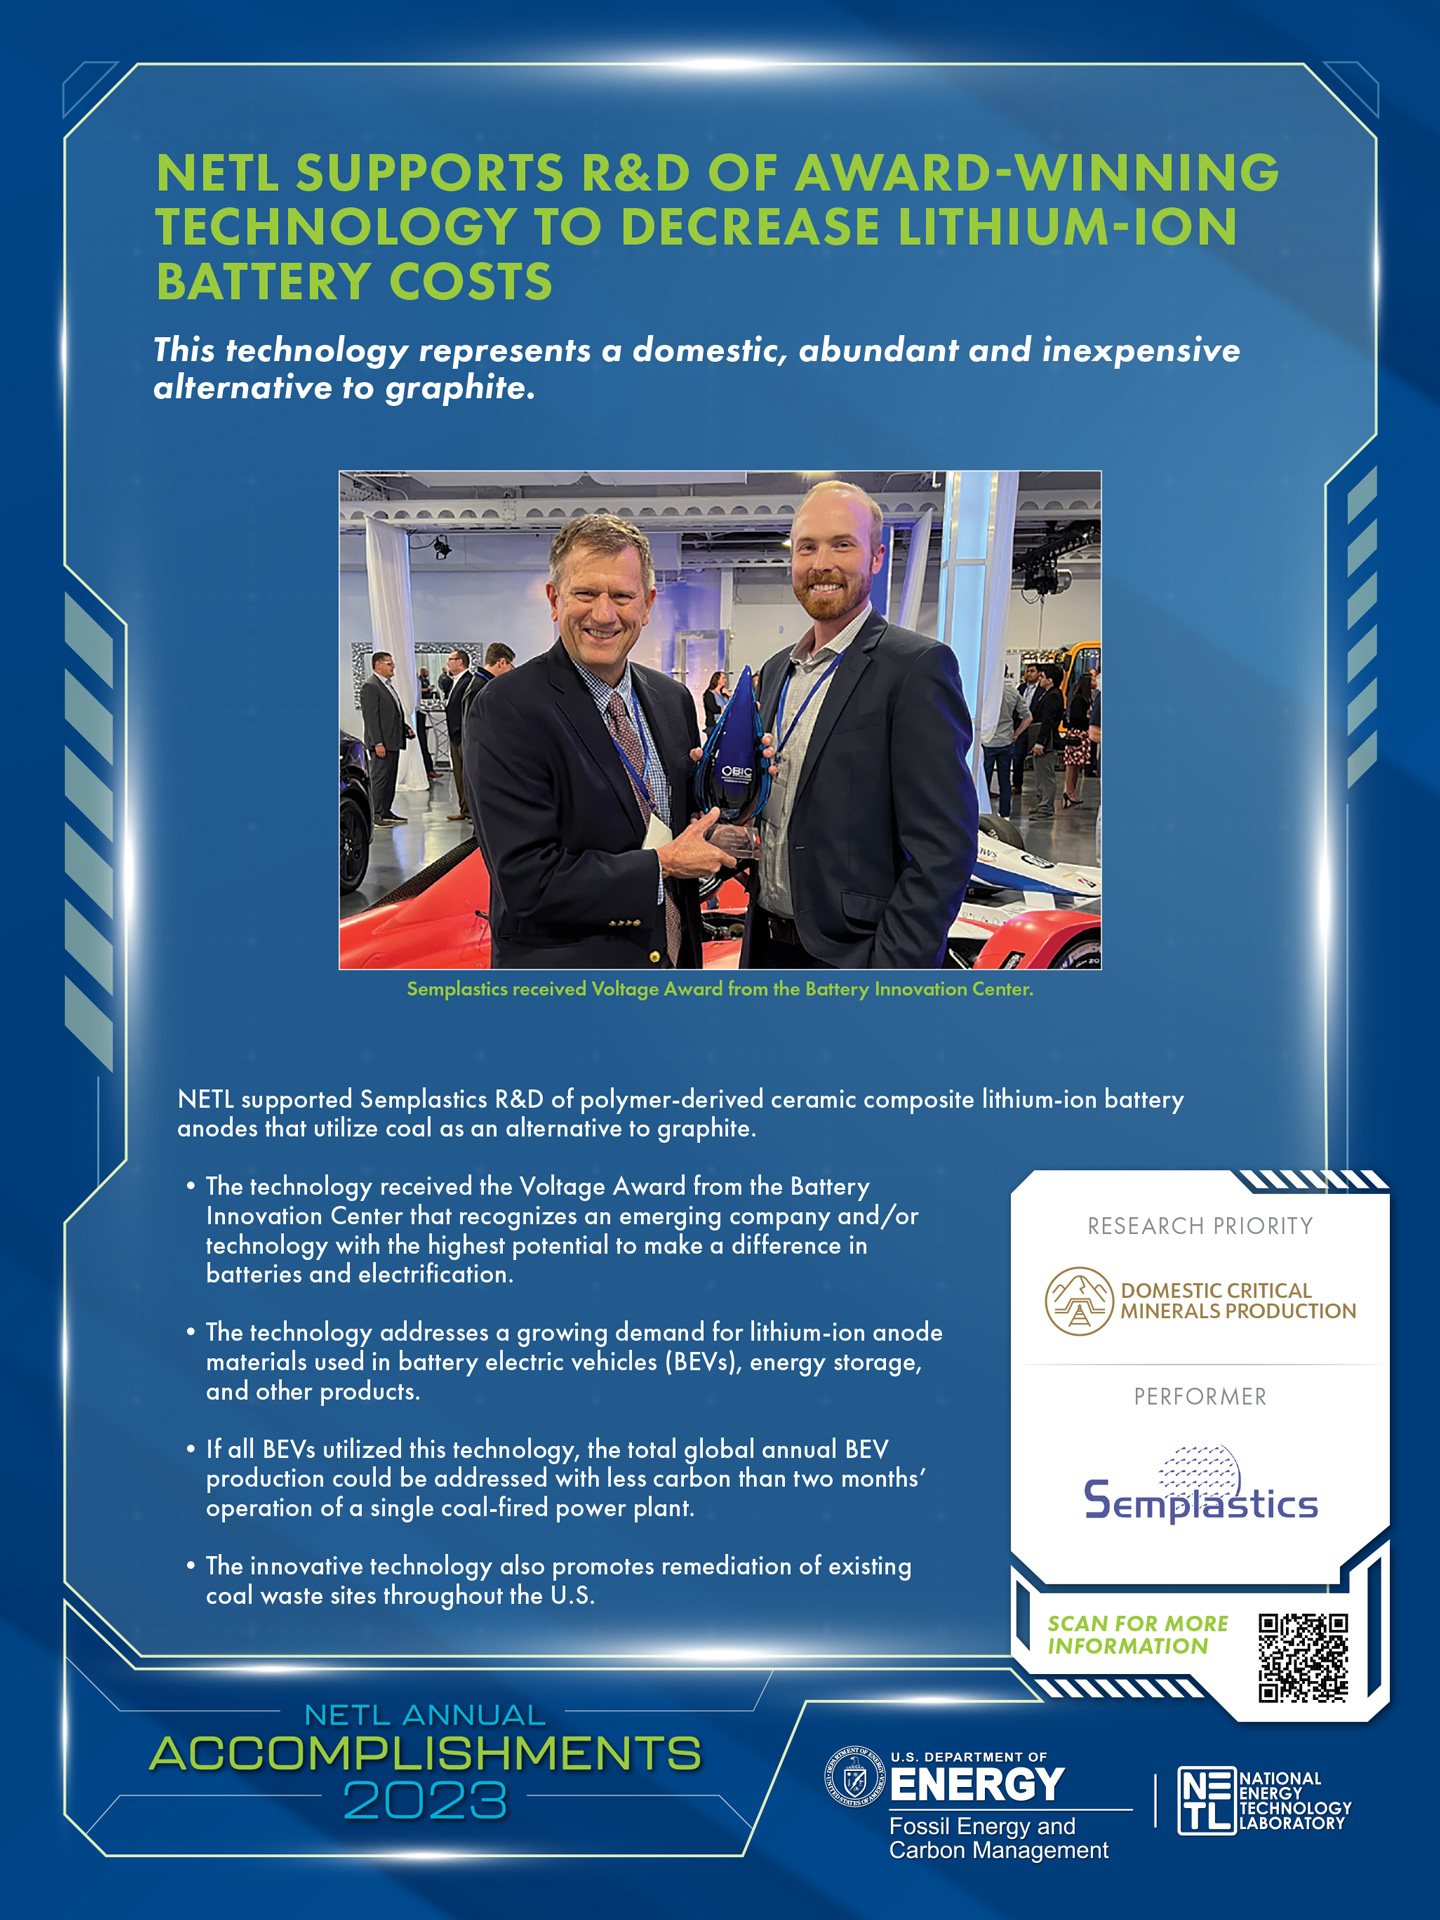 NETL Supports R&D of Award-Winning Technology to Decrease Lithium-Ion Battery Costs